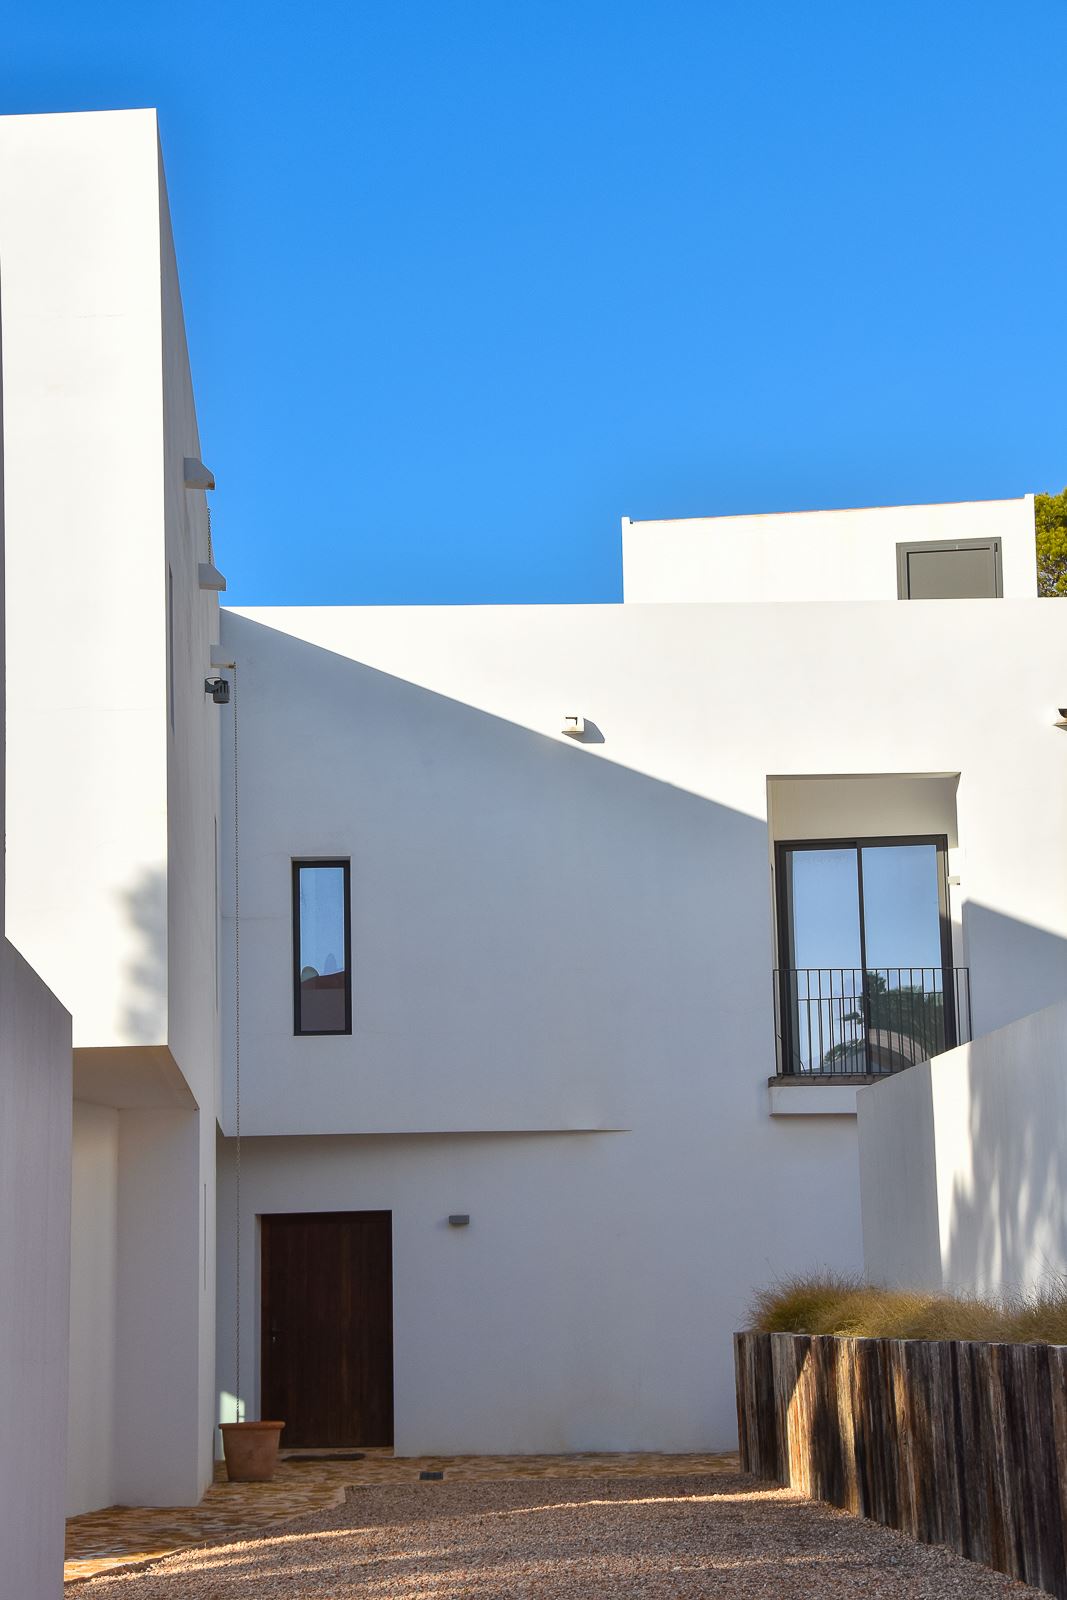 Large newly renovated modern villa with garden and pool for sale